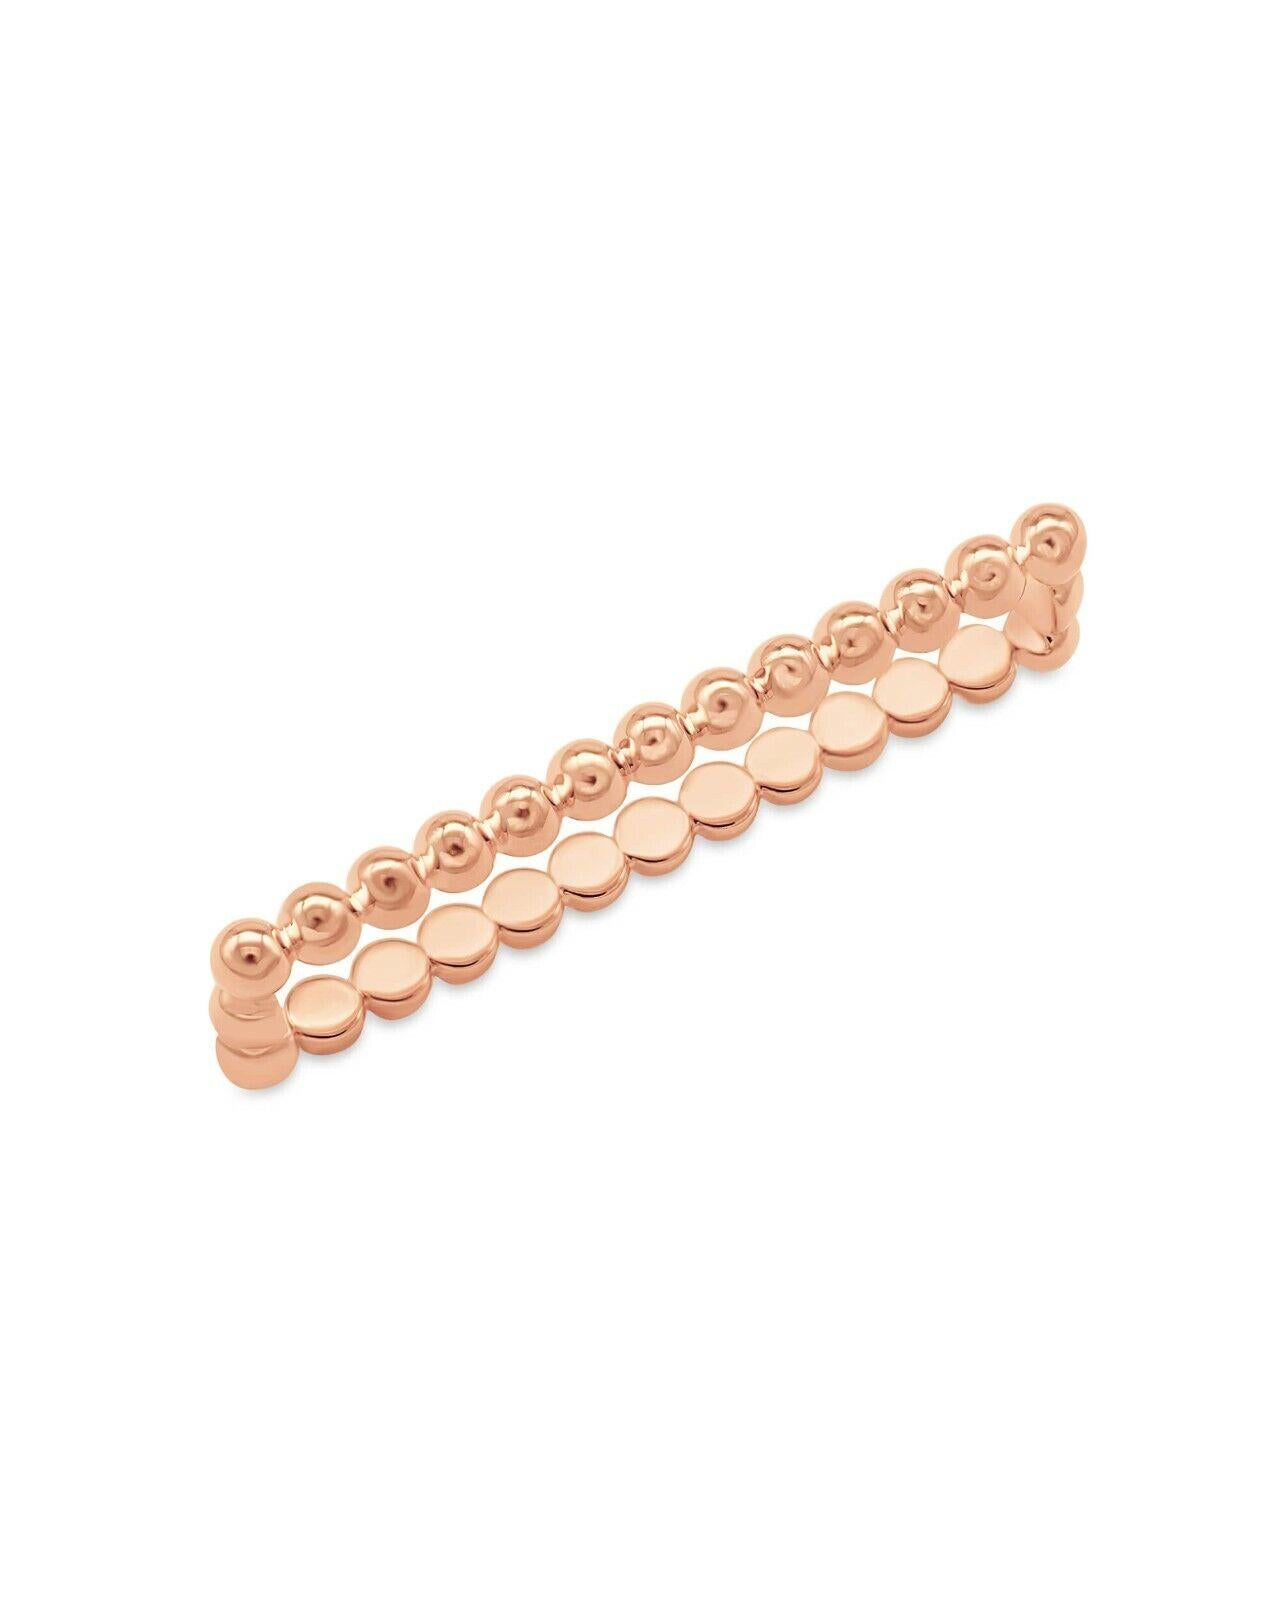 Beaded Smart Watch Band Charm 14k Solid Gold Watches Band Accessories Gift


Material
Rose Gold, Solid Gold, White Gold, Yellow Gold
Theme
Luxury
Size
3x22 mm Approx
Gross Weight
1.5 Grams Approx
Capacity
1-3 Watches
Type
Watch Band